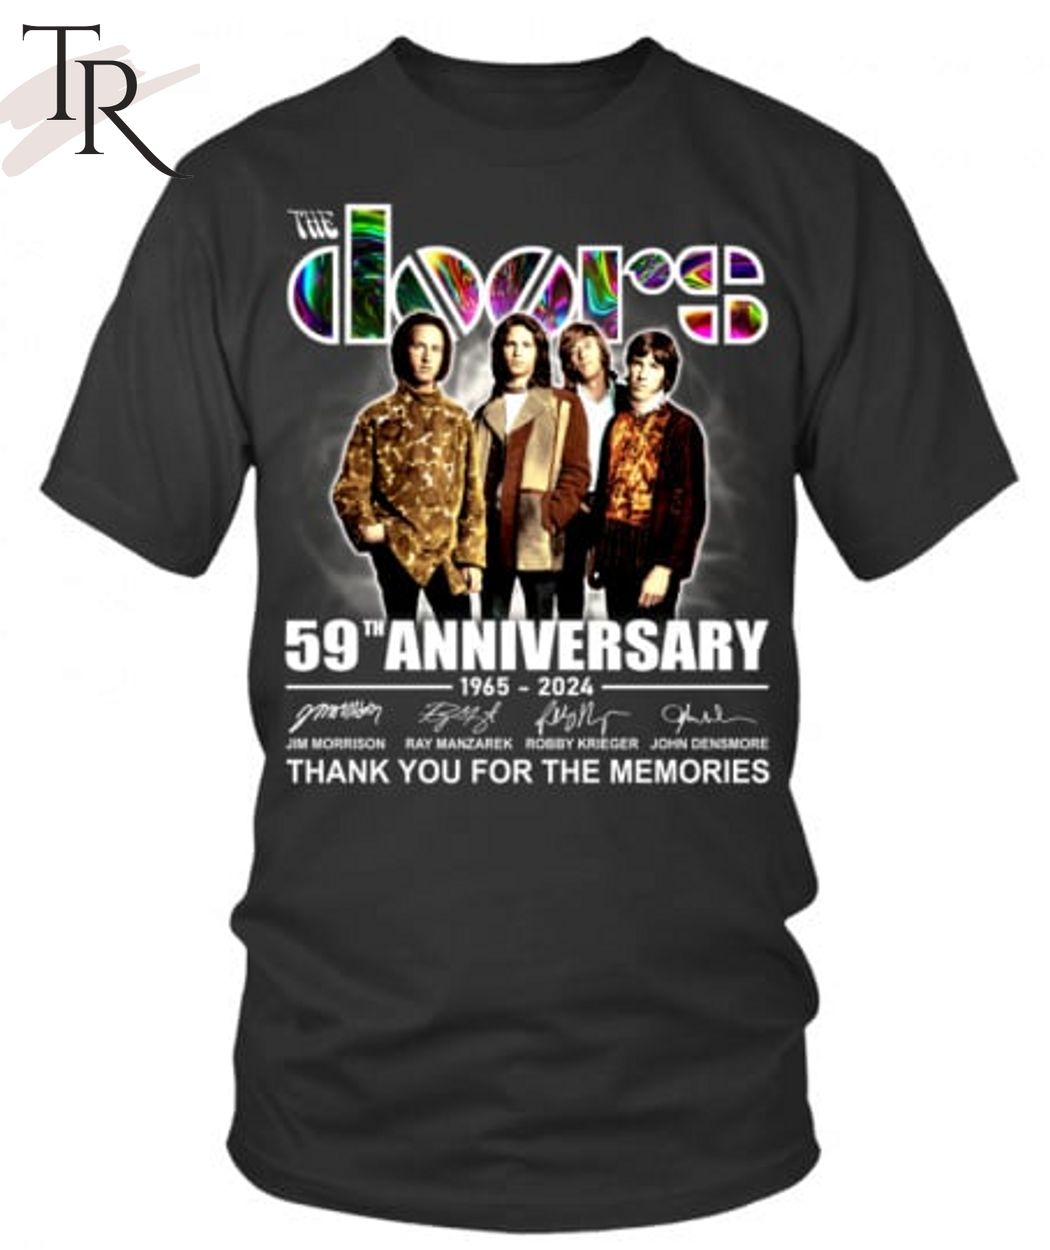 The Doors 59th Anniversary 1965-2024 Thank You For The Memories T-Shirt